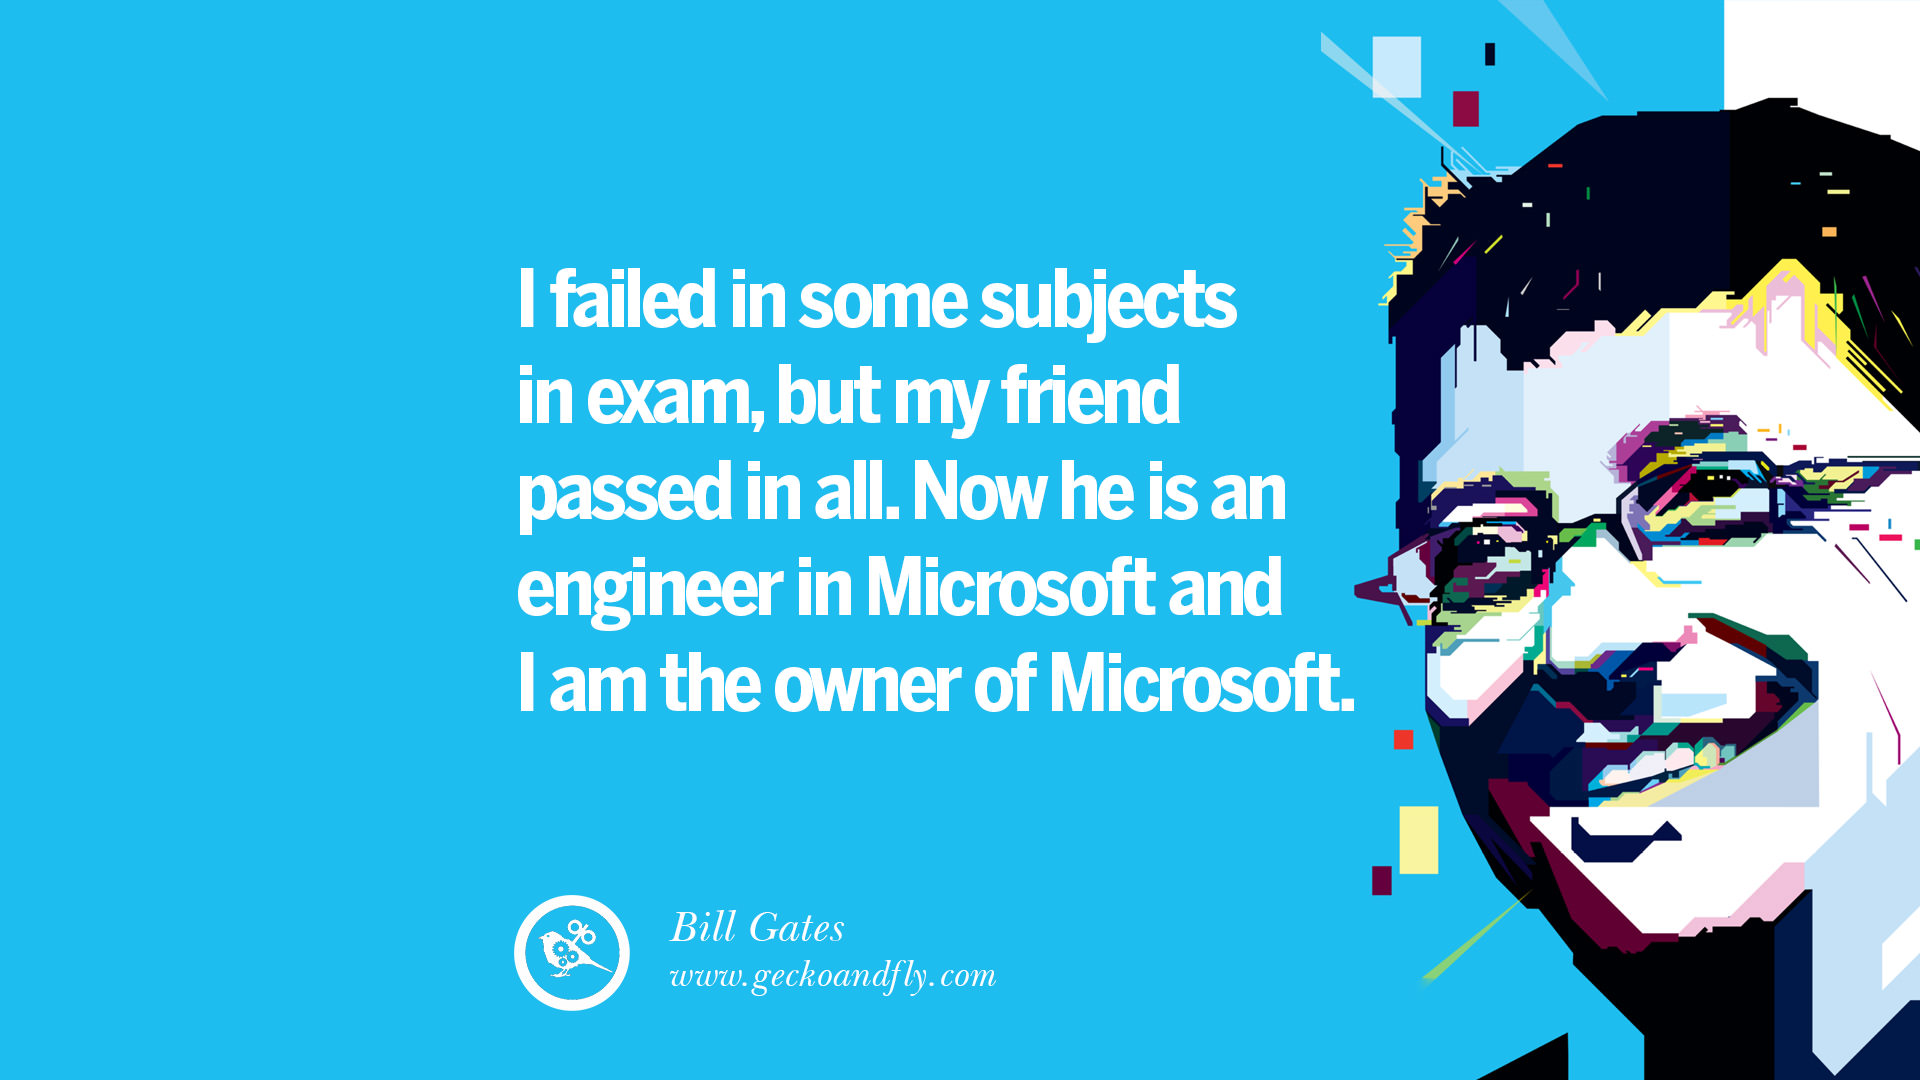 Bill Gates Funny Quotes 15 Inspiring Bill Gates Quotes on Success and Life